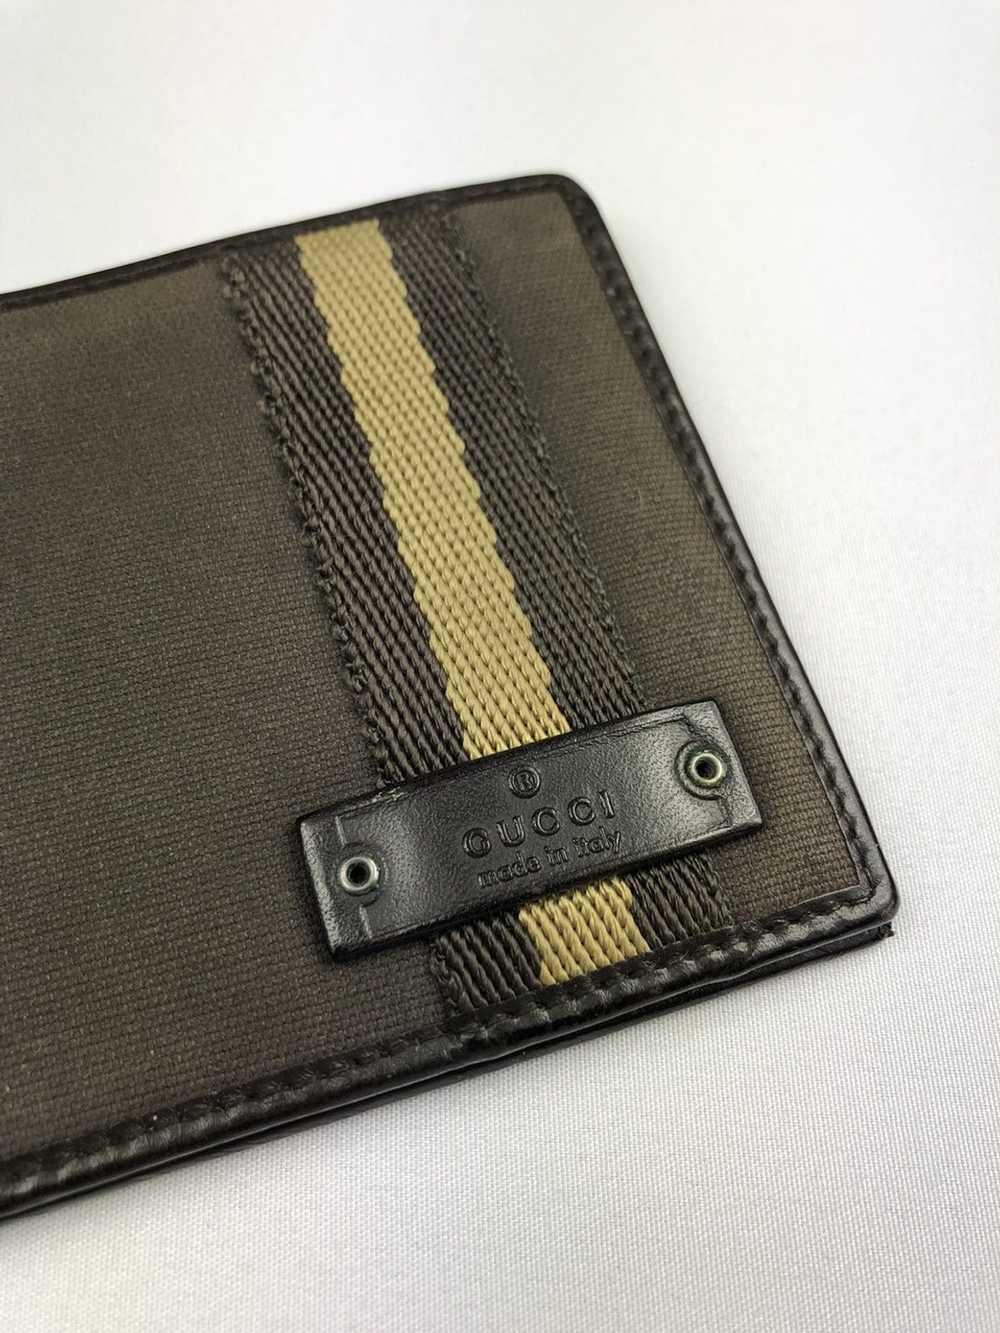 Gucci Gucci striped canvas leather wallet - image 2